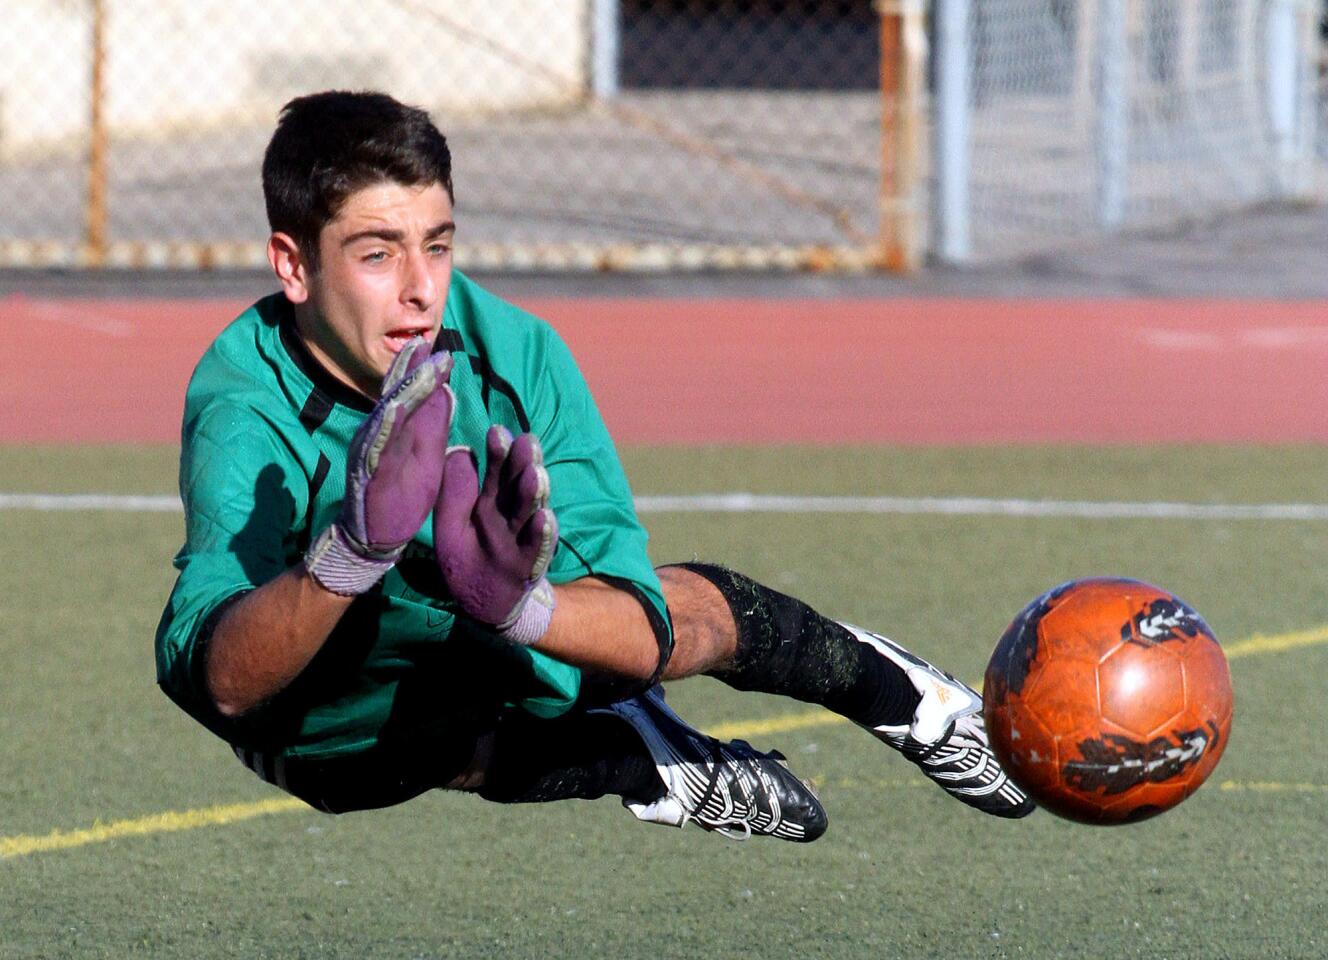 Hoover's keeper Emil Ohanyan dives to keep the ball from scoring off of a Glendale shot in a Pacific League boys soccer game at Glendale High School on Thursday, February 13, 2014.